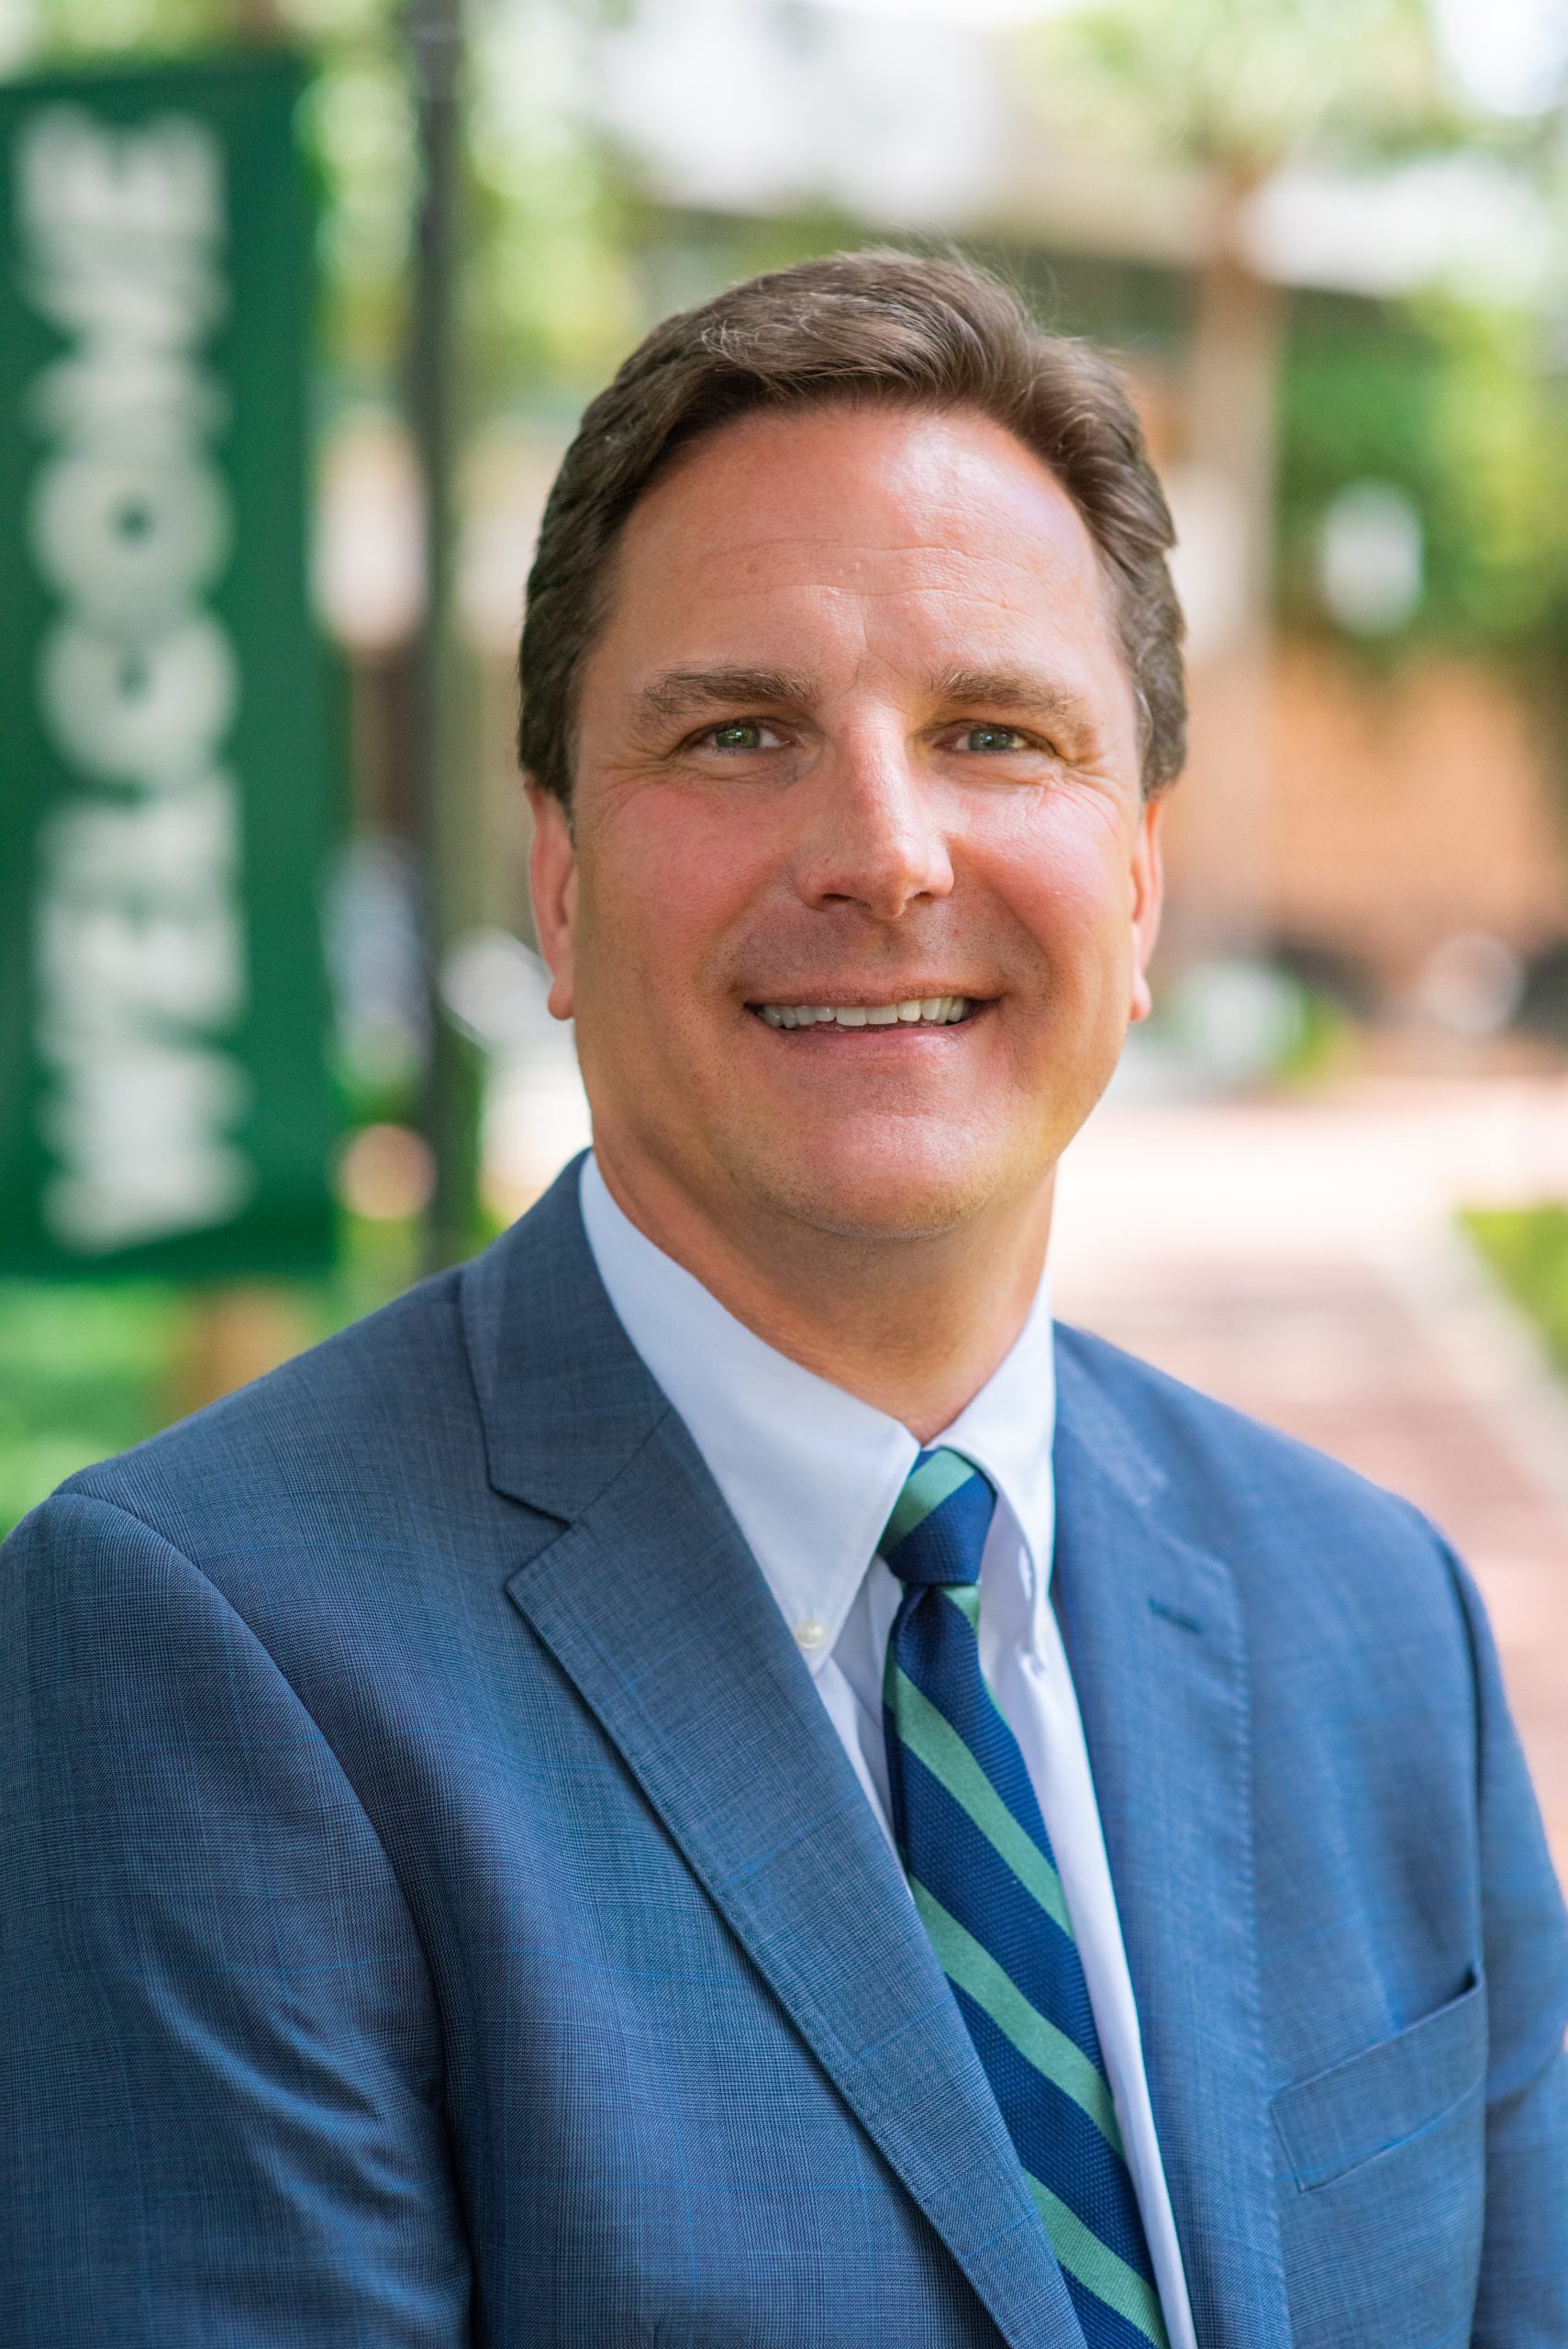 Stetson President Christopher F. Roellke will soon have an Inauguration ceremony